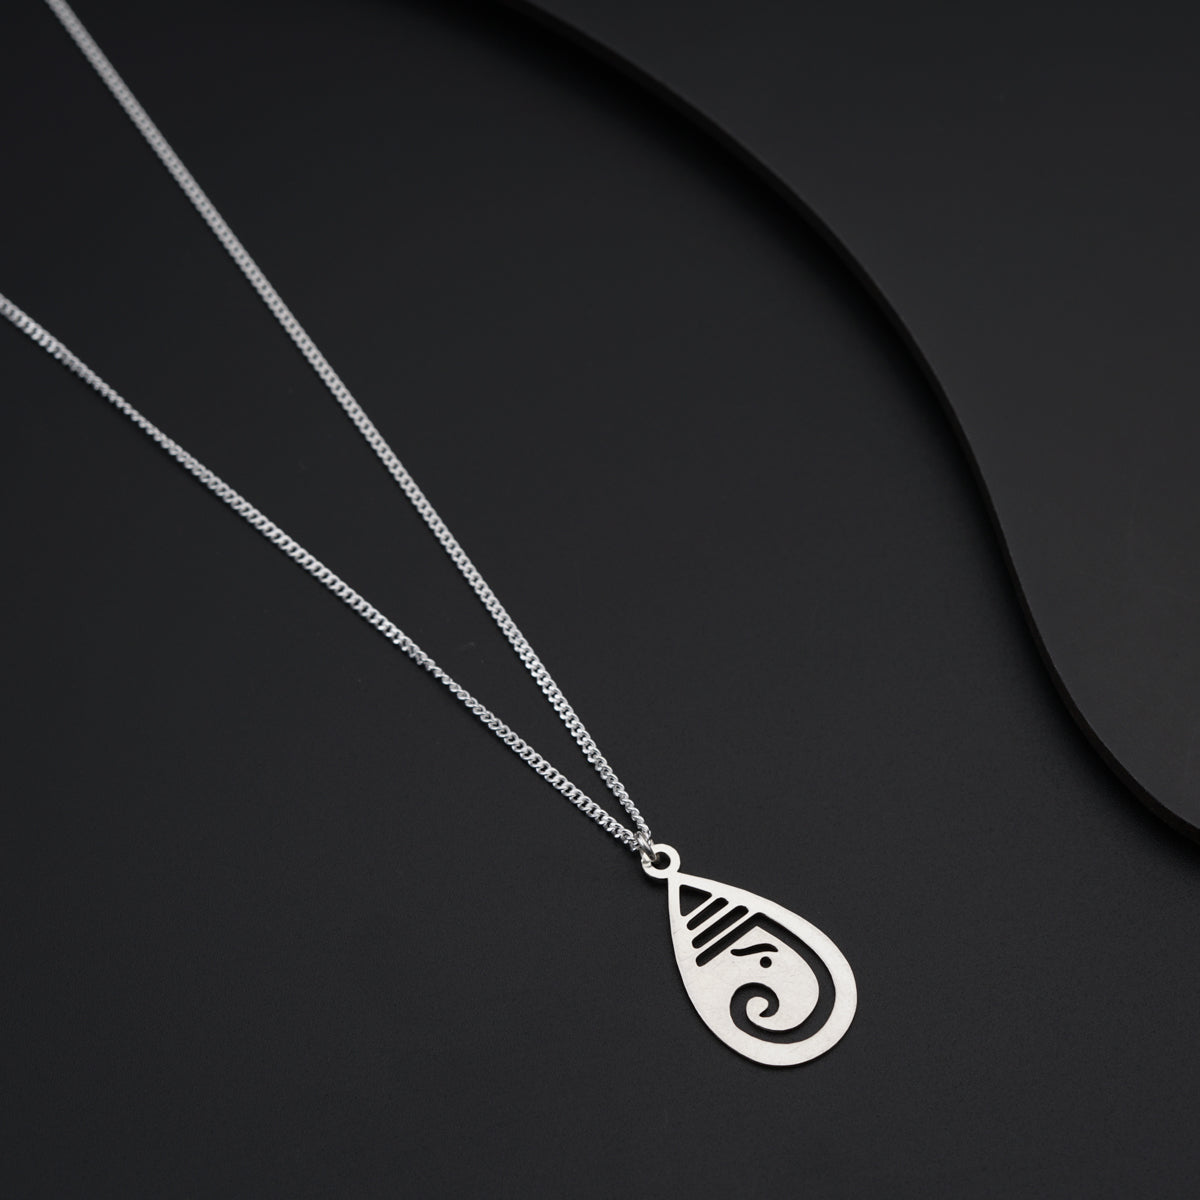 a silver necklace with a pendant on a black background